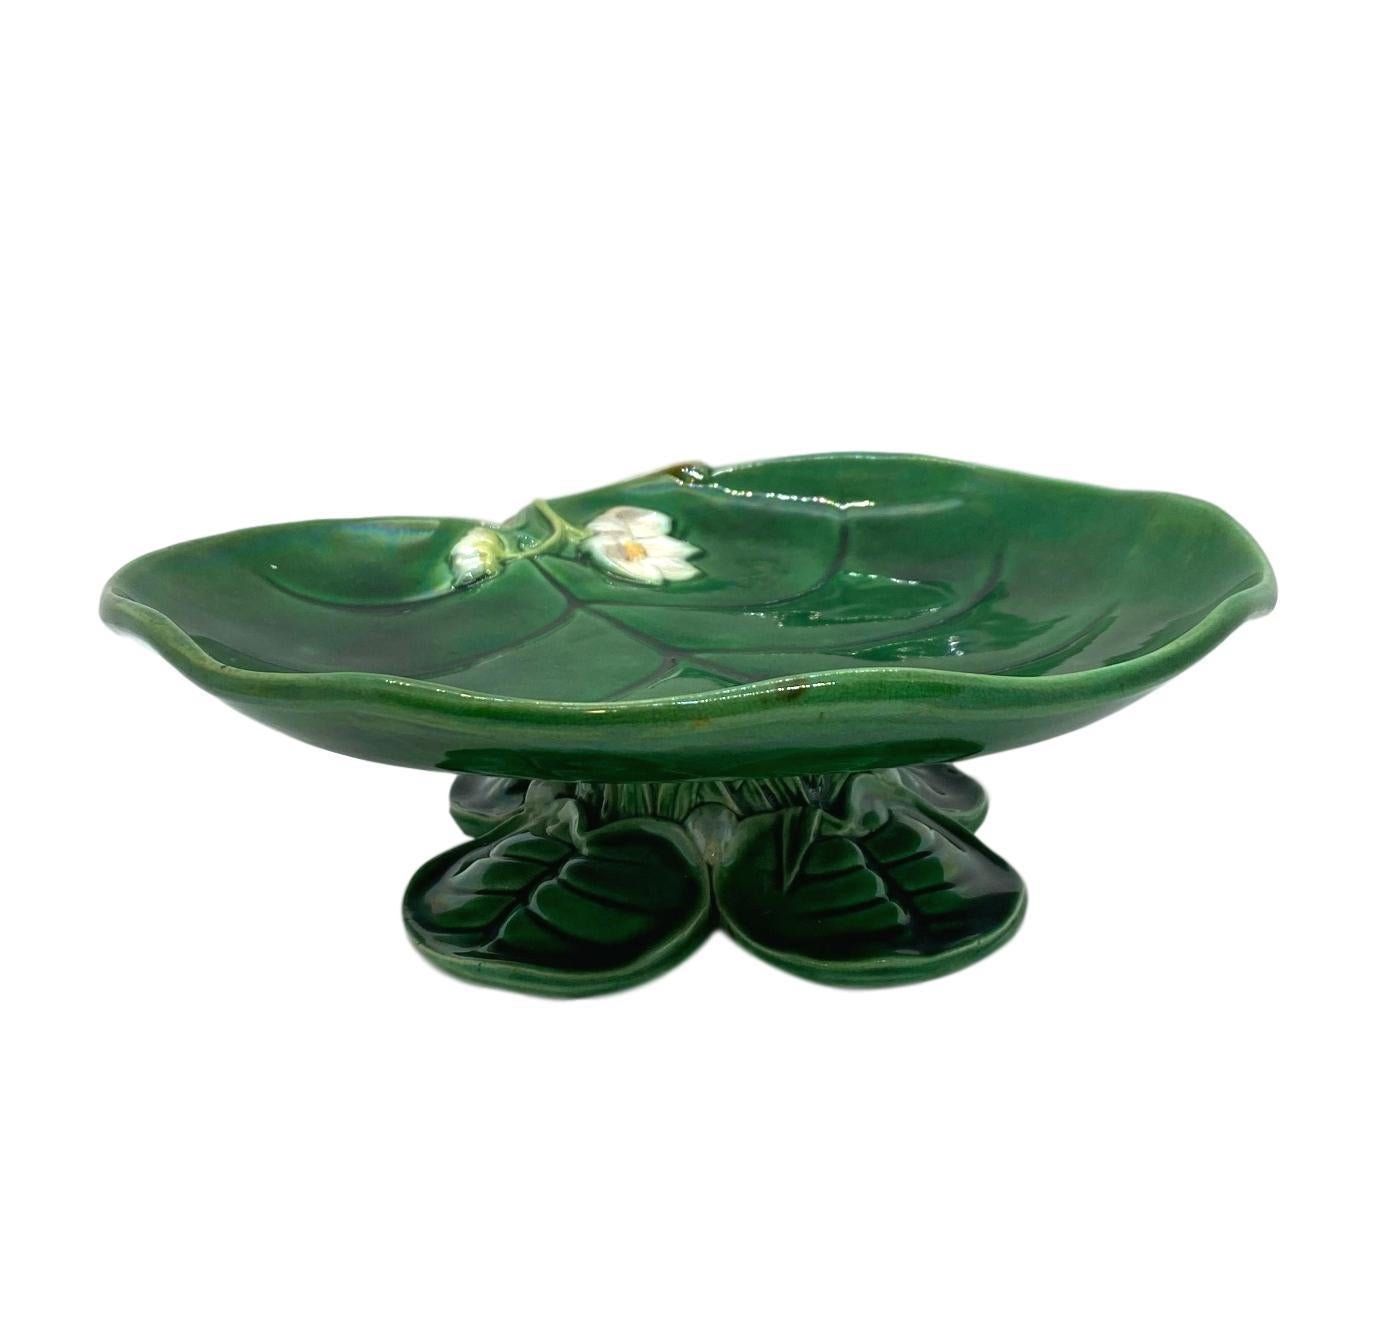 George Jones Majolica water lily footed comport glazed in lush greens, with a relief-molded lily flower, the base formed by four lily pads, English, dated 1877.
Marks to reverse: 'GJ' Monogram; British Registry Lozenge for 9 March 1869, the date